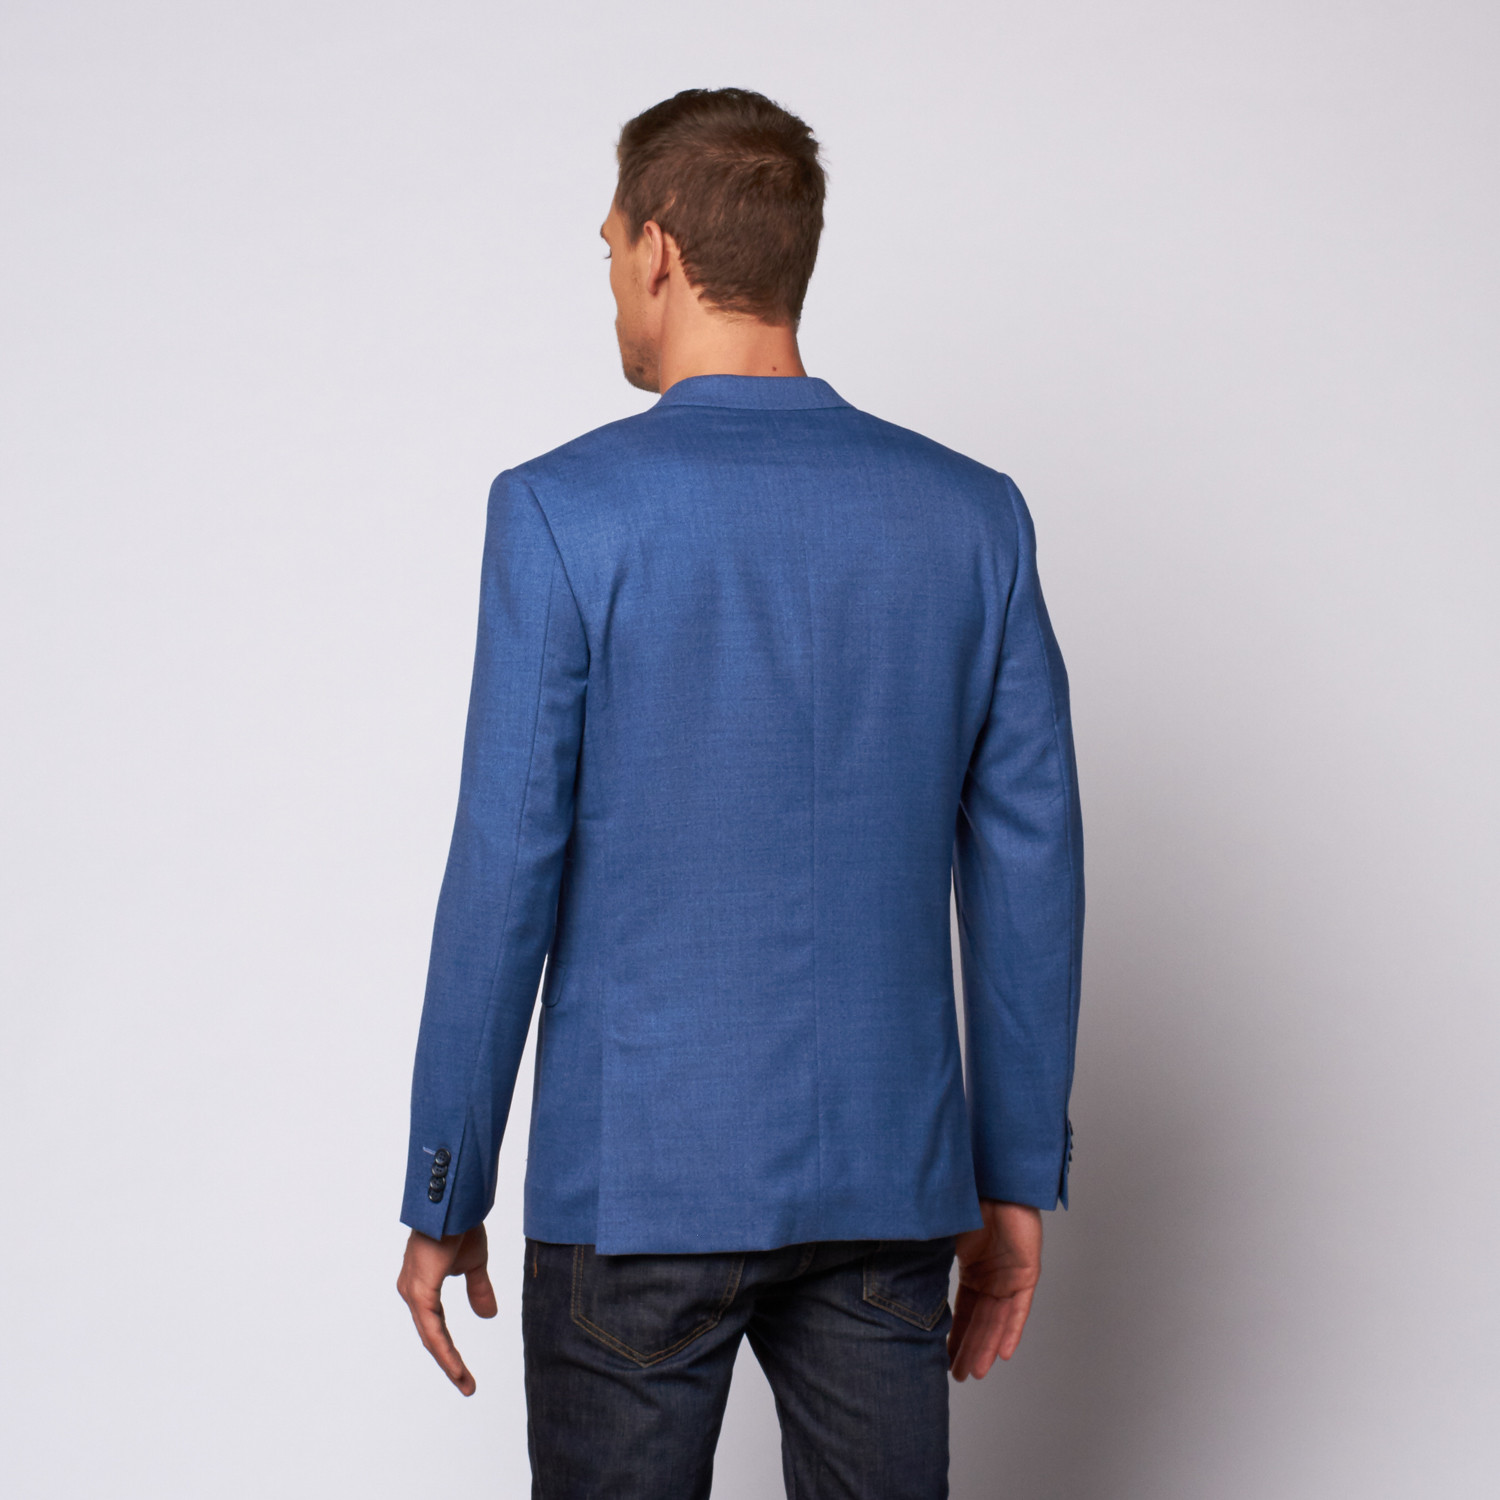 Stein Tonning Suit Jacket // Patrol (US: 36) - Moods of Norway - Touch